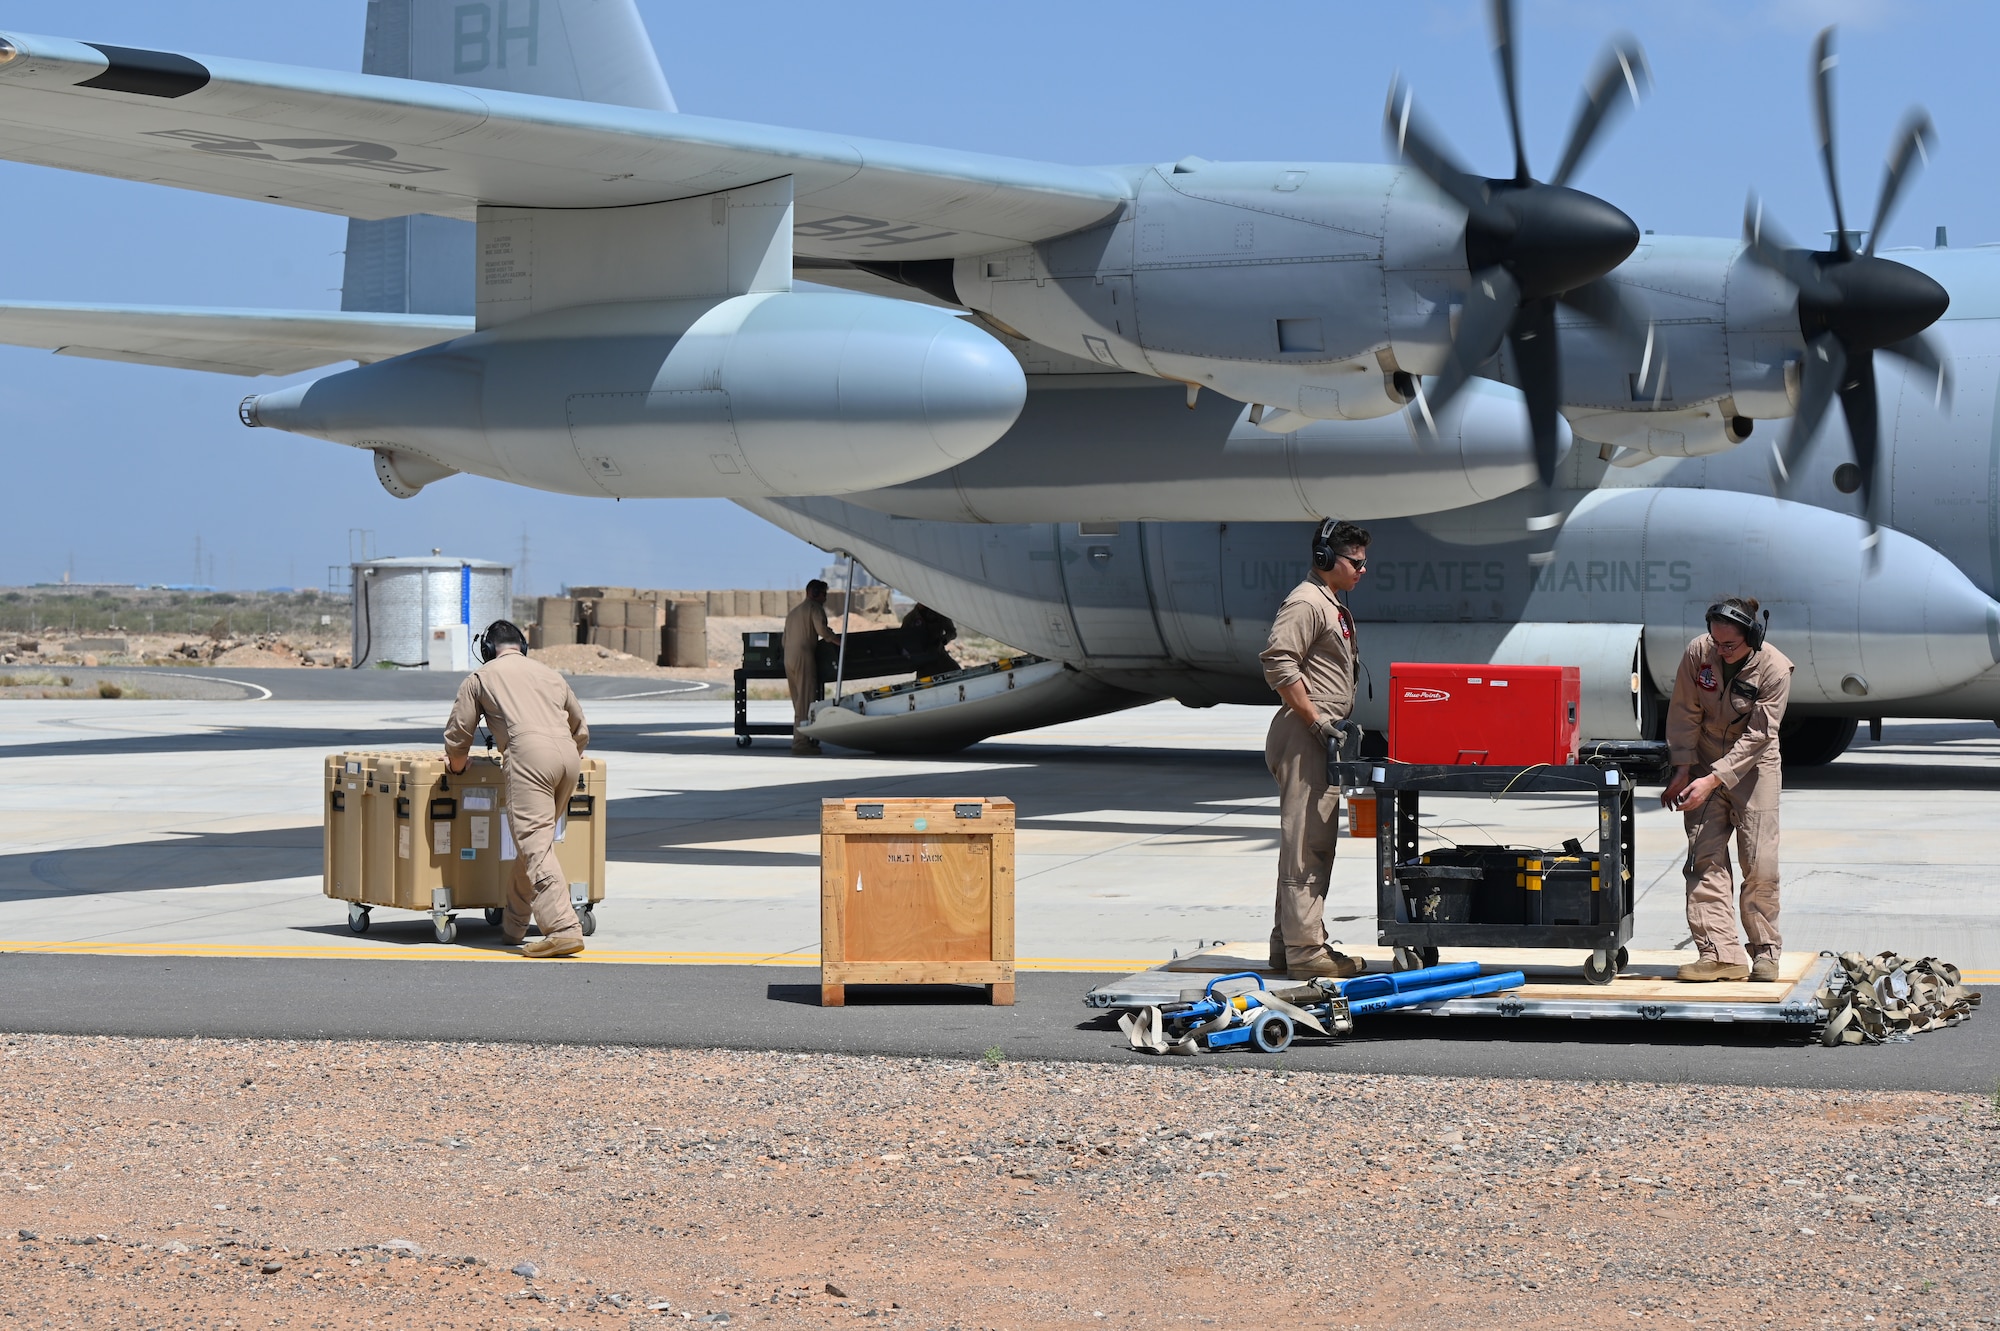 U.S. Marine Corps KC-130 crew members load supplies in support of a simulated Forward Arming and Refueling Point (FARP) exercise at Chabelley Airfield, Djibouti, Feb. 22, 2023. The FARP mission makes it possible to quickly refuel and rearm because aircraft supporting combat operations can refuel much closer to their area of operation, saving a significant amount of time. (U.S. Air Force photo by Tech. Sgt. Jayson Burns)